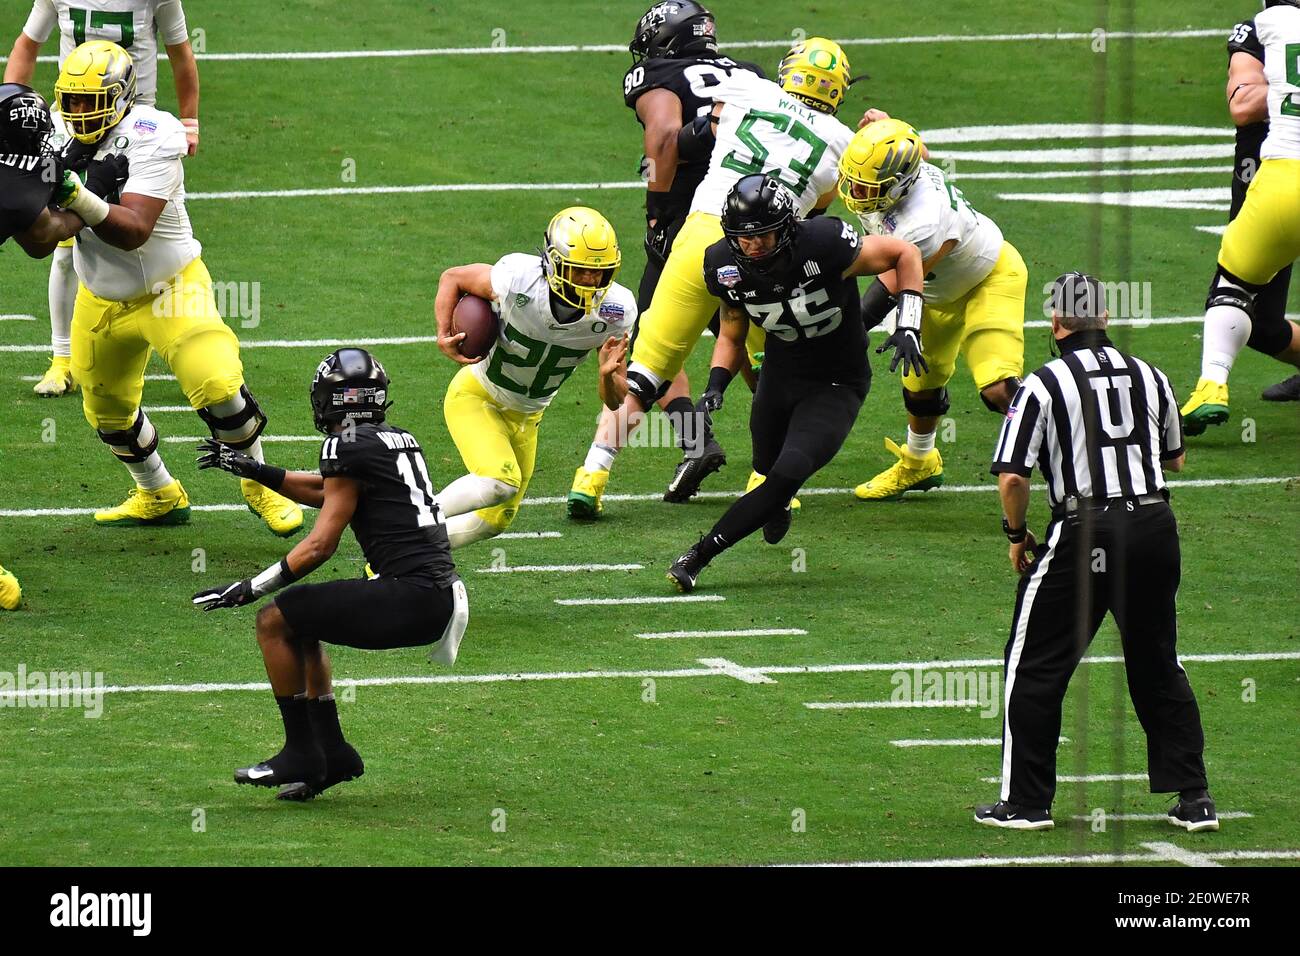 Glendale, AZ, USA. 2nd Jan, 2021. Oregon Ducks running back Travis Dye #26  runs in action in the first quarter during the Fiesta Bowl College football  game between the Iowa State Cyclones